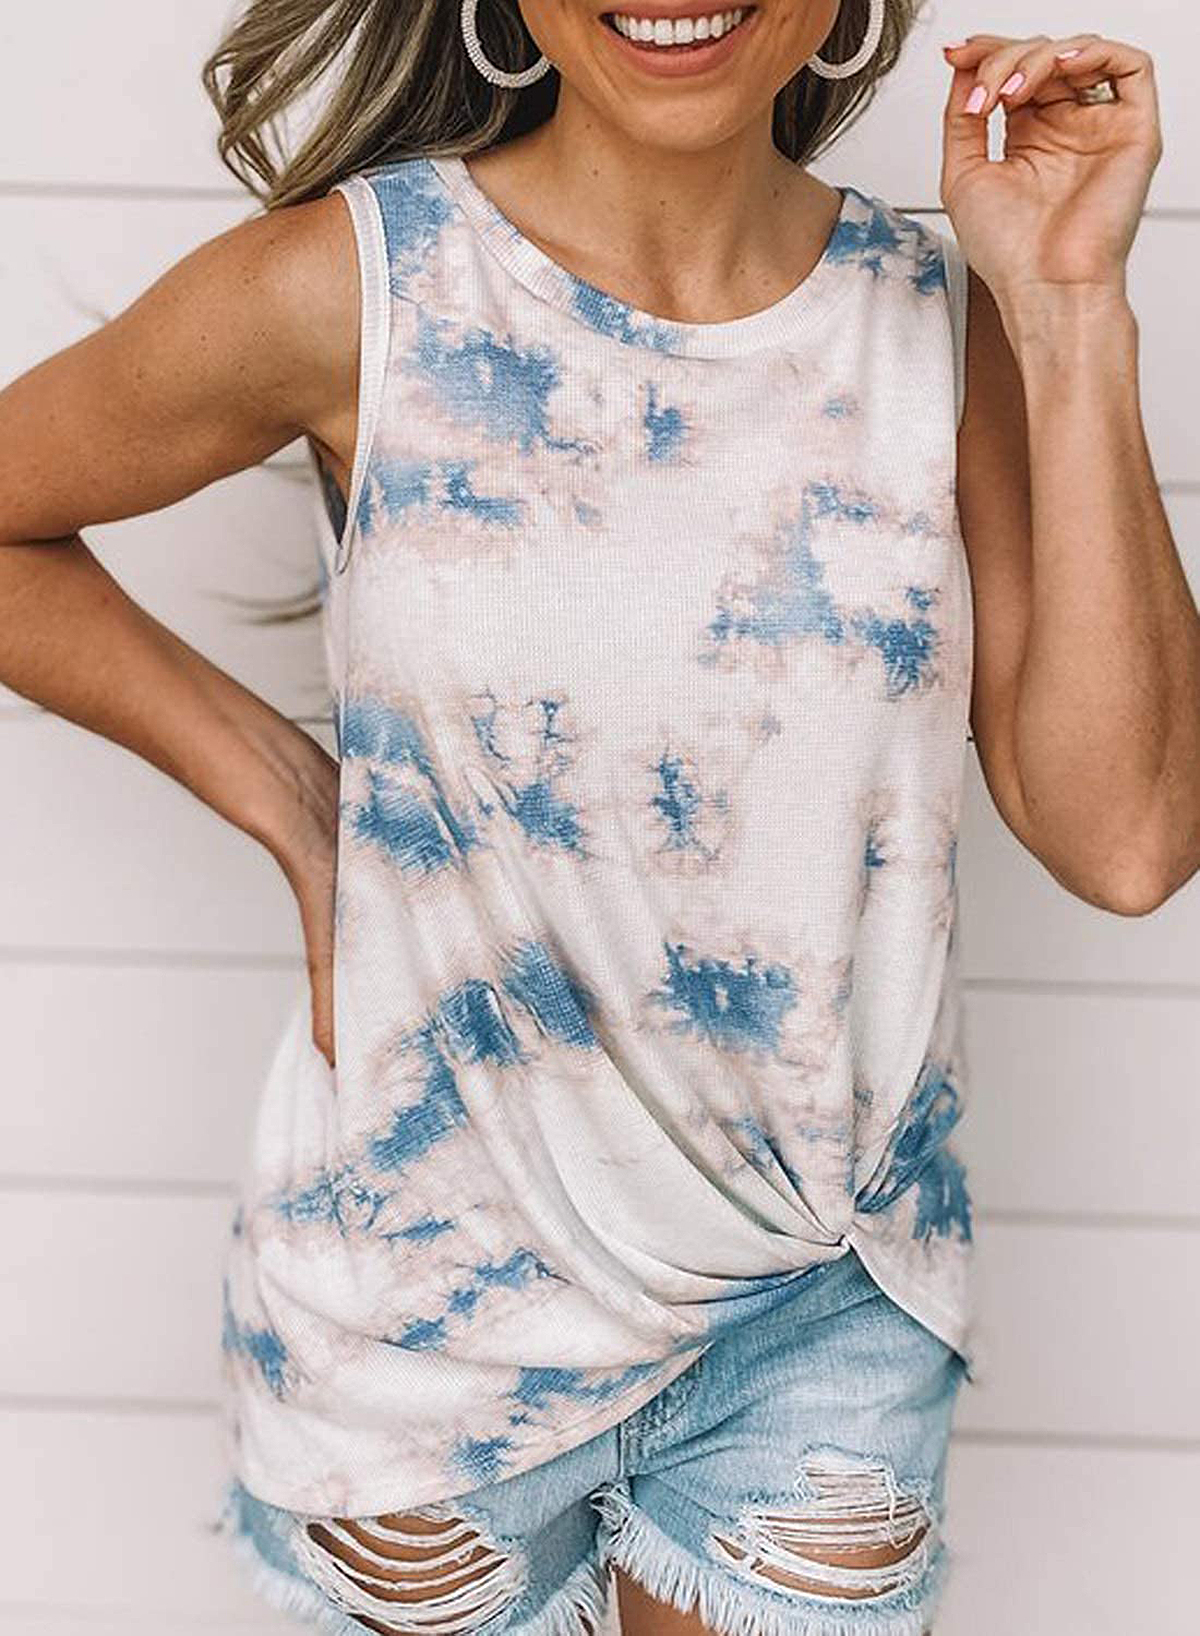 Biucly Tie-Dye Tank Is Sure to Put a Smile on Your Face | UsWeekly